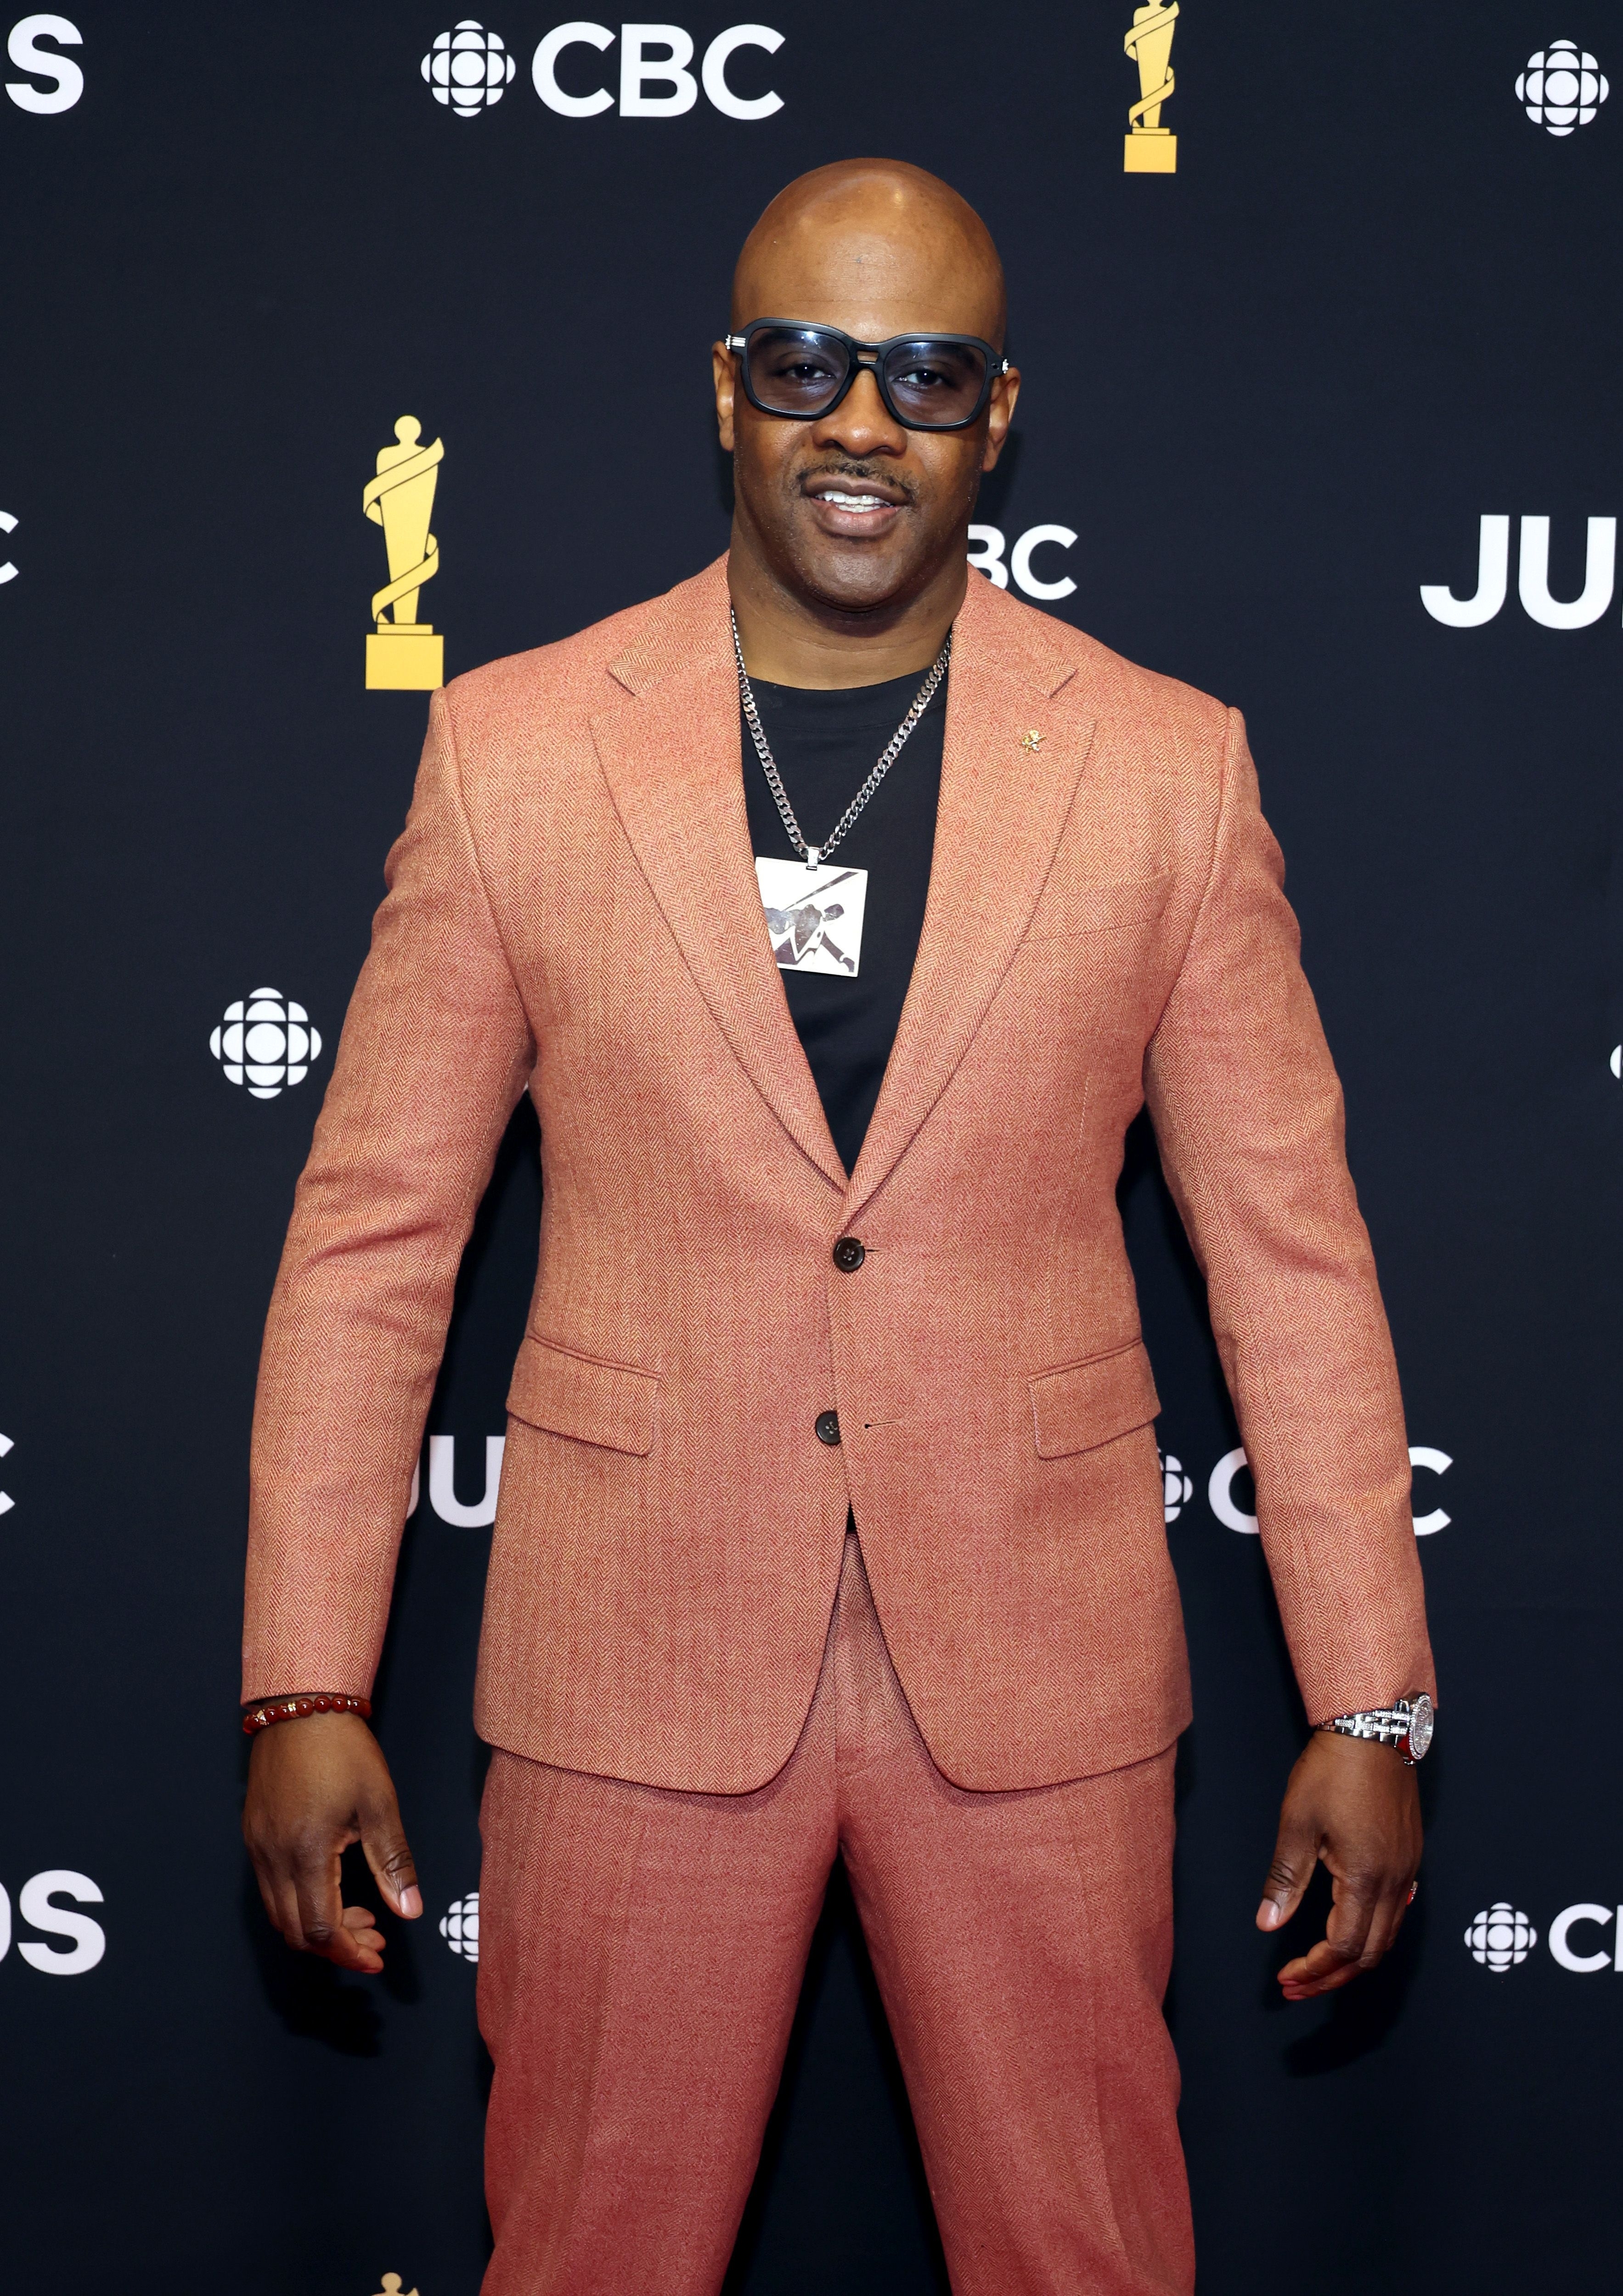 Man in a peach suit poses with sunglasses at an event with CBC backdrop